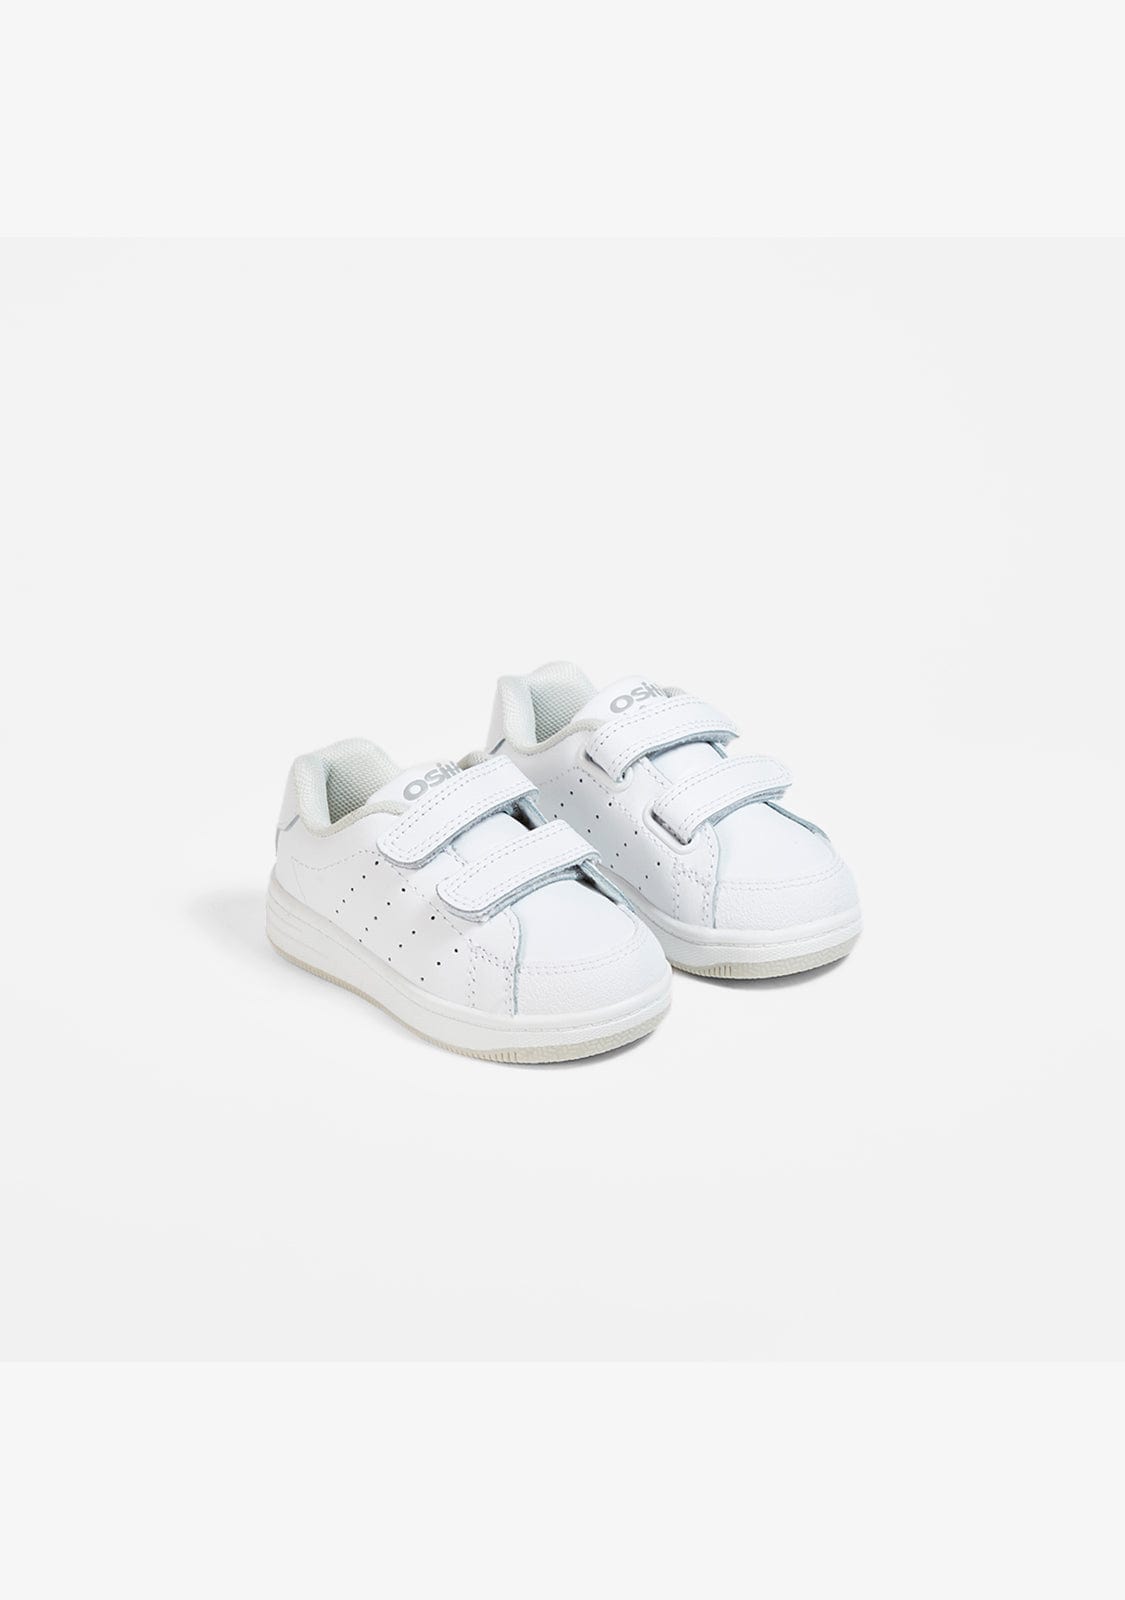 OSITO Shoes Babies White Washable Leather Trainers